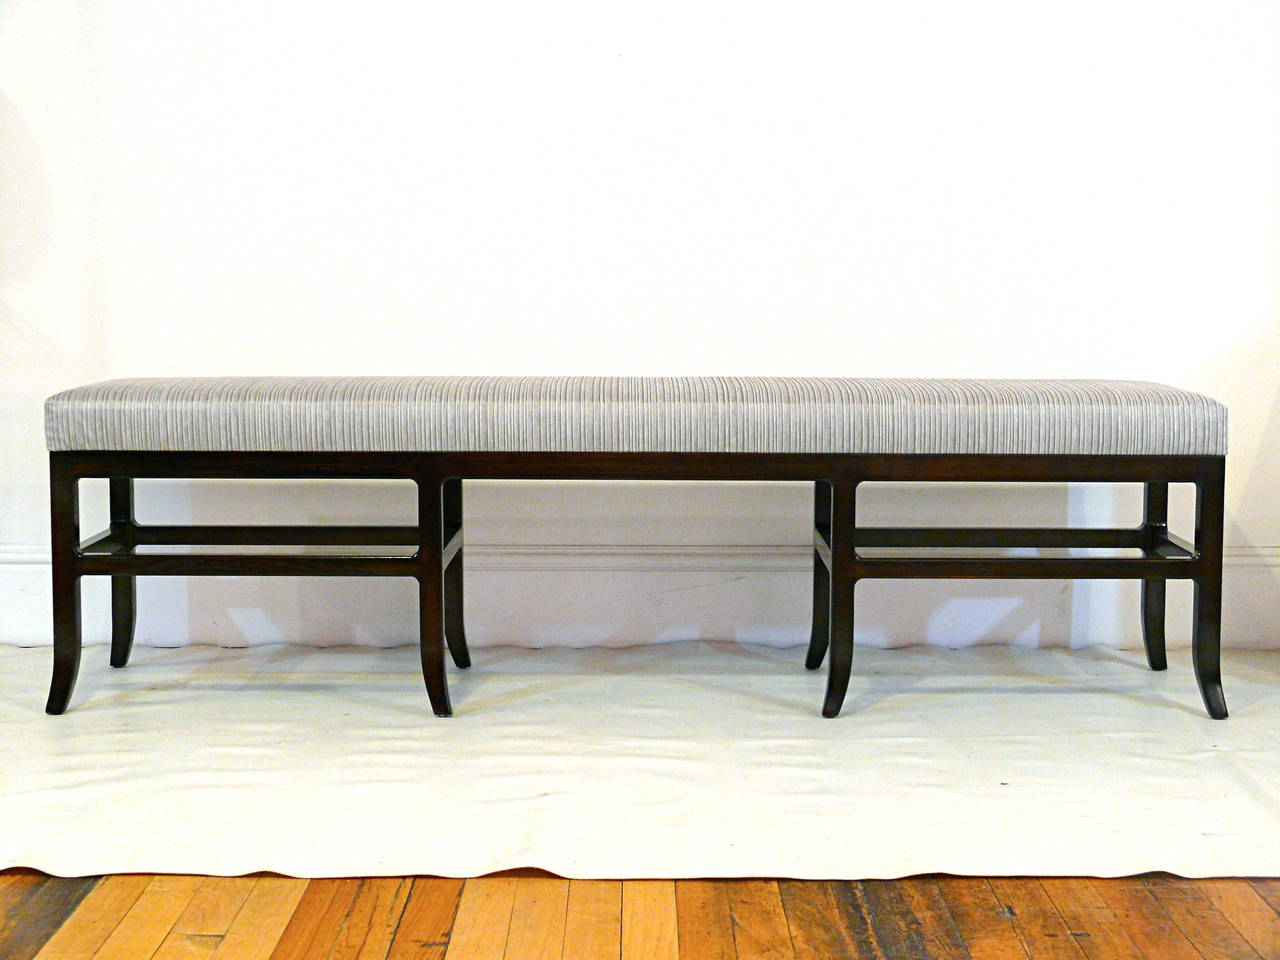 20th Century Double Pedestal Splayed Leg Bench in the Manner of James Mont